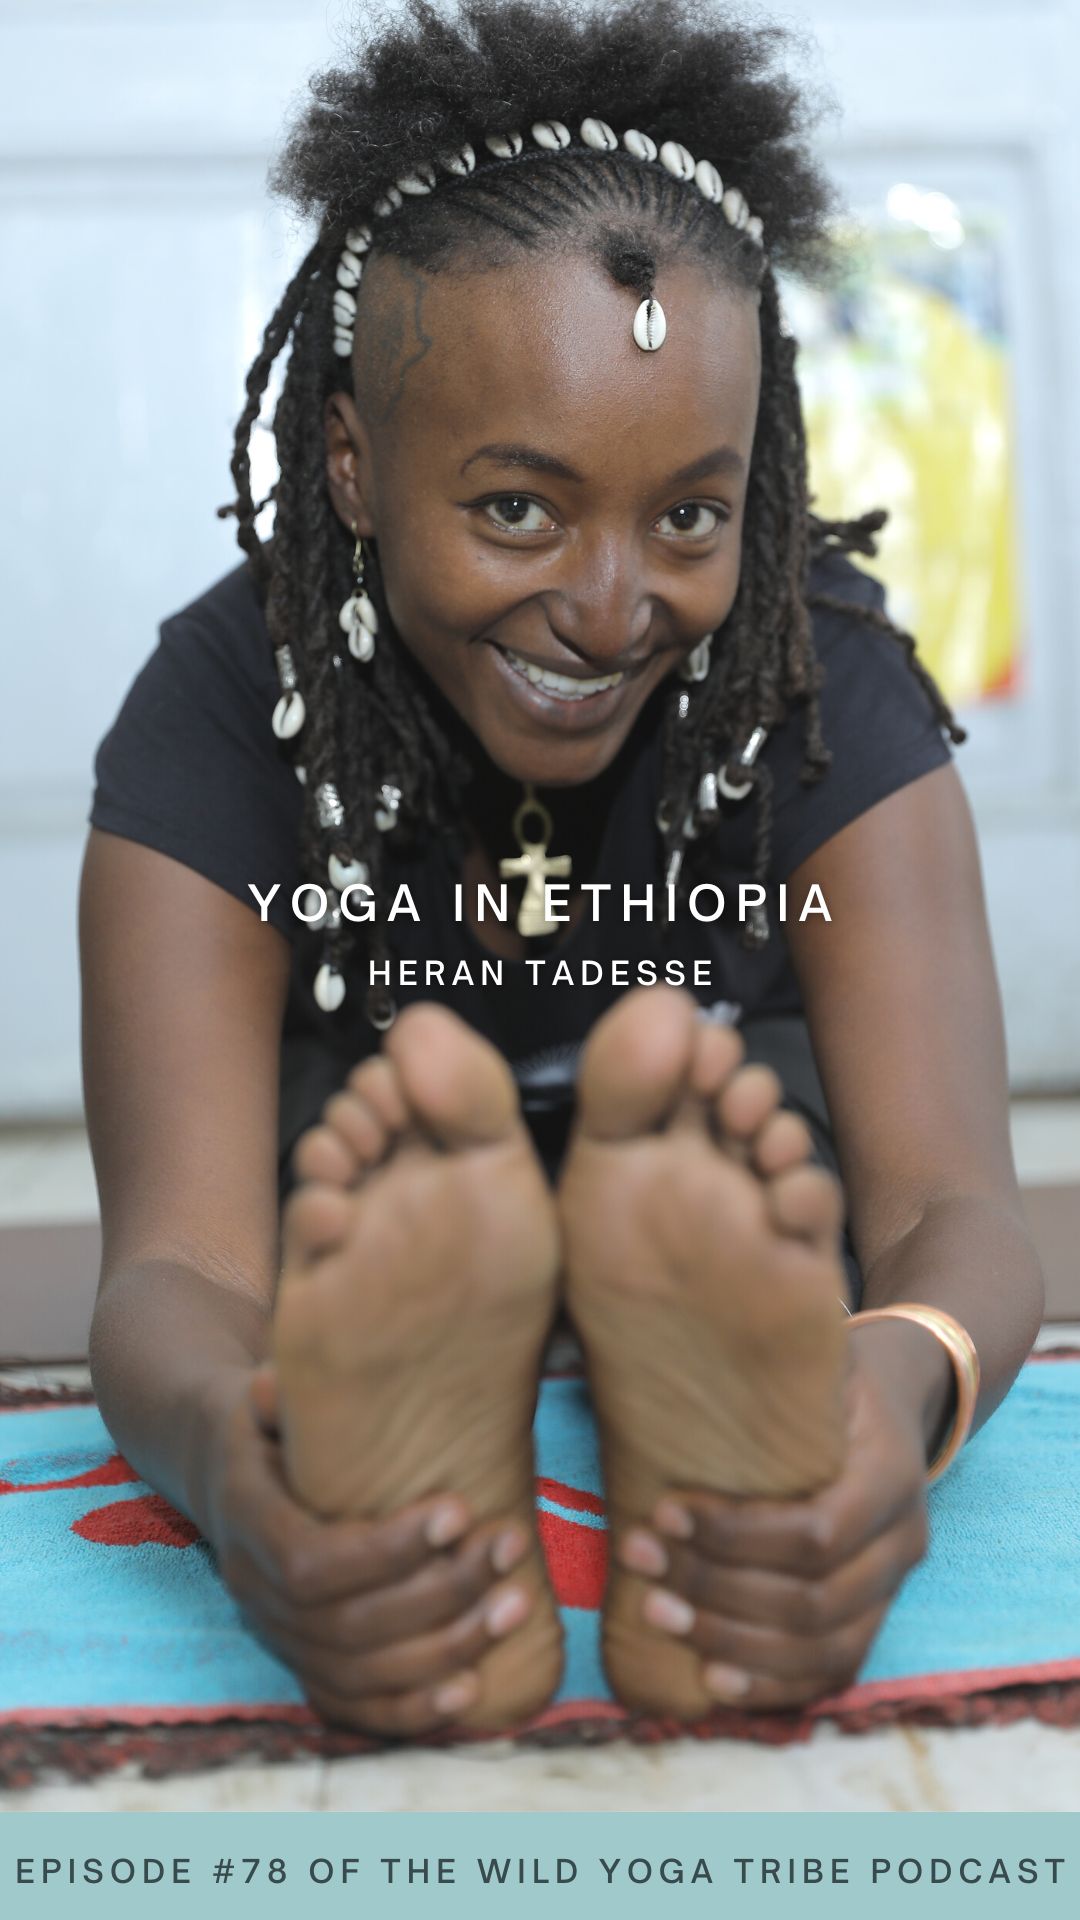 Meet Heran Tadesse a yoga teacher from Ethiopia who takes walks us through what the institutions of Kemetic Yoga and Afrikan Yoga are all about. Welcome to yoga in Ethiopia!